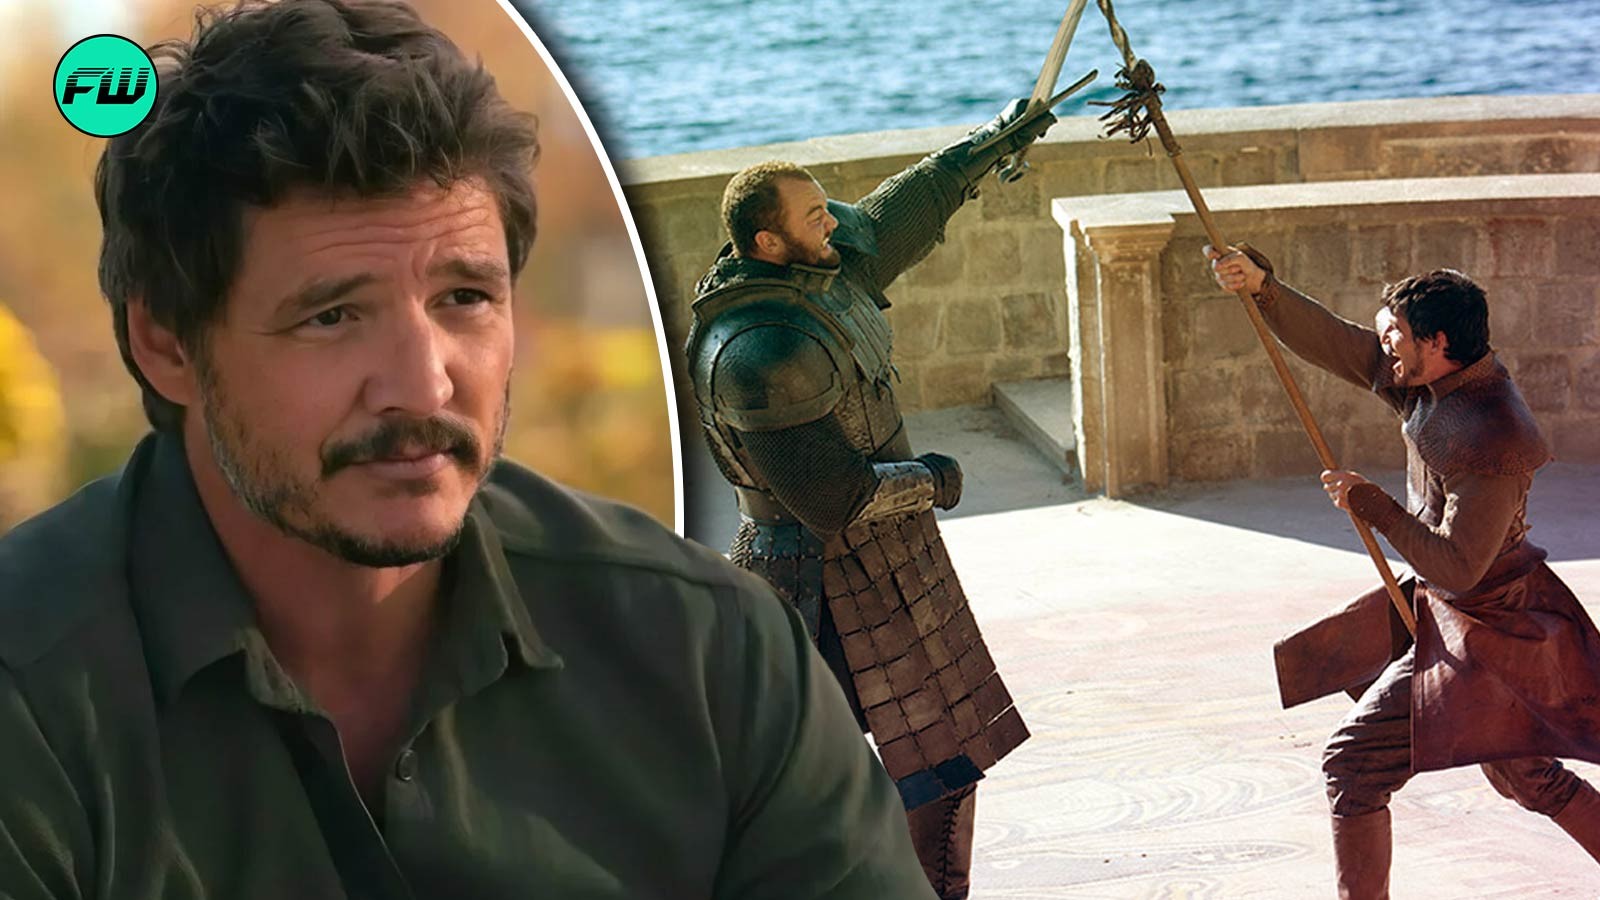 Pedro Pascal, Game of Thrones